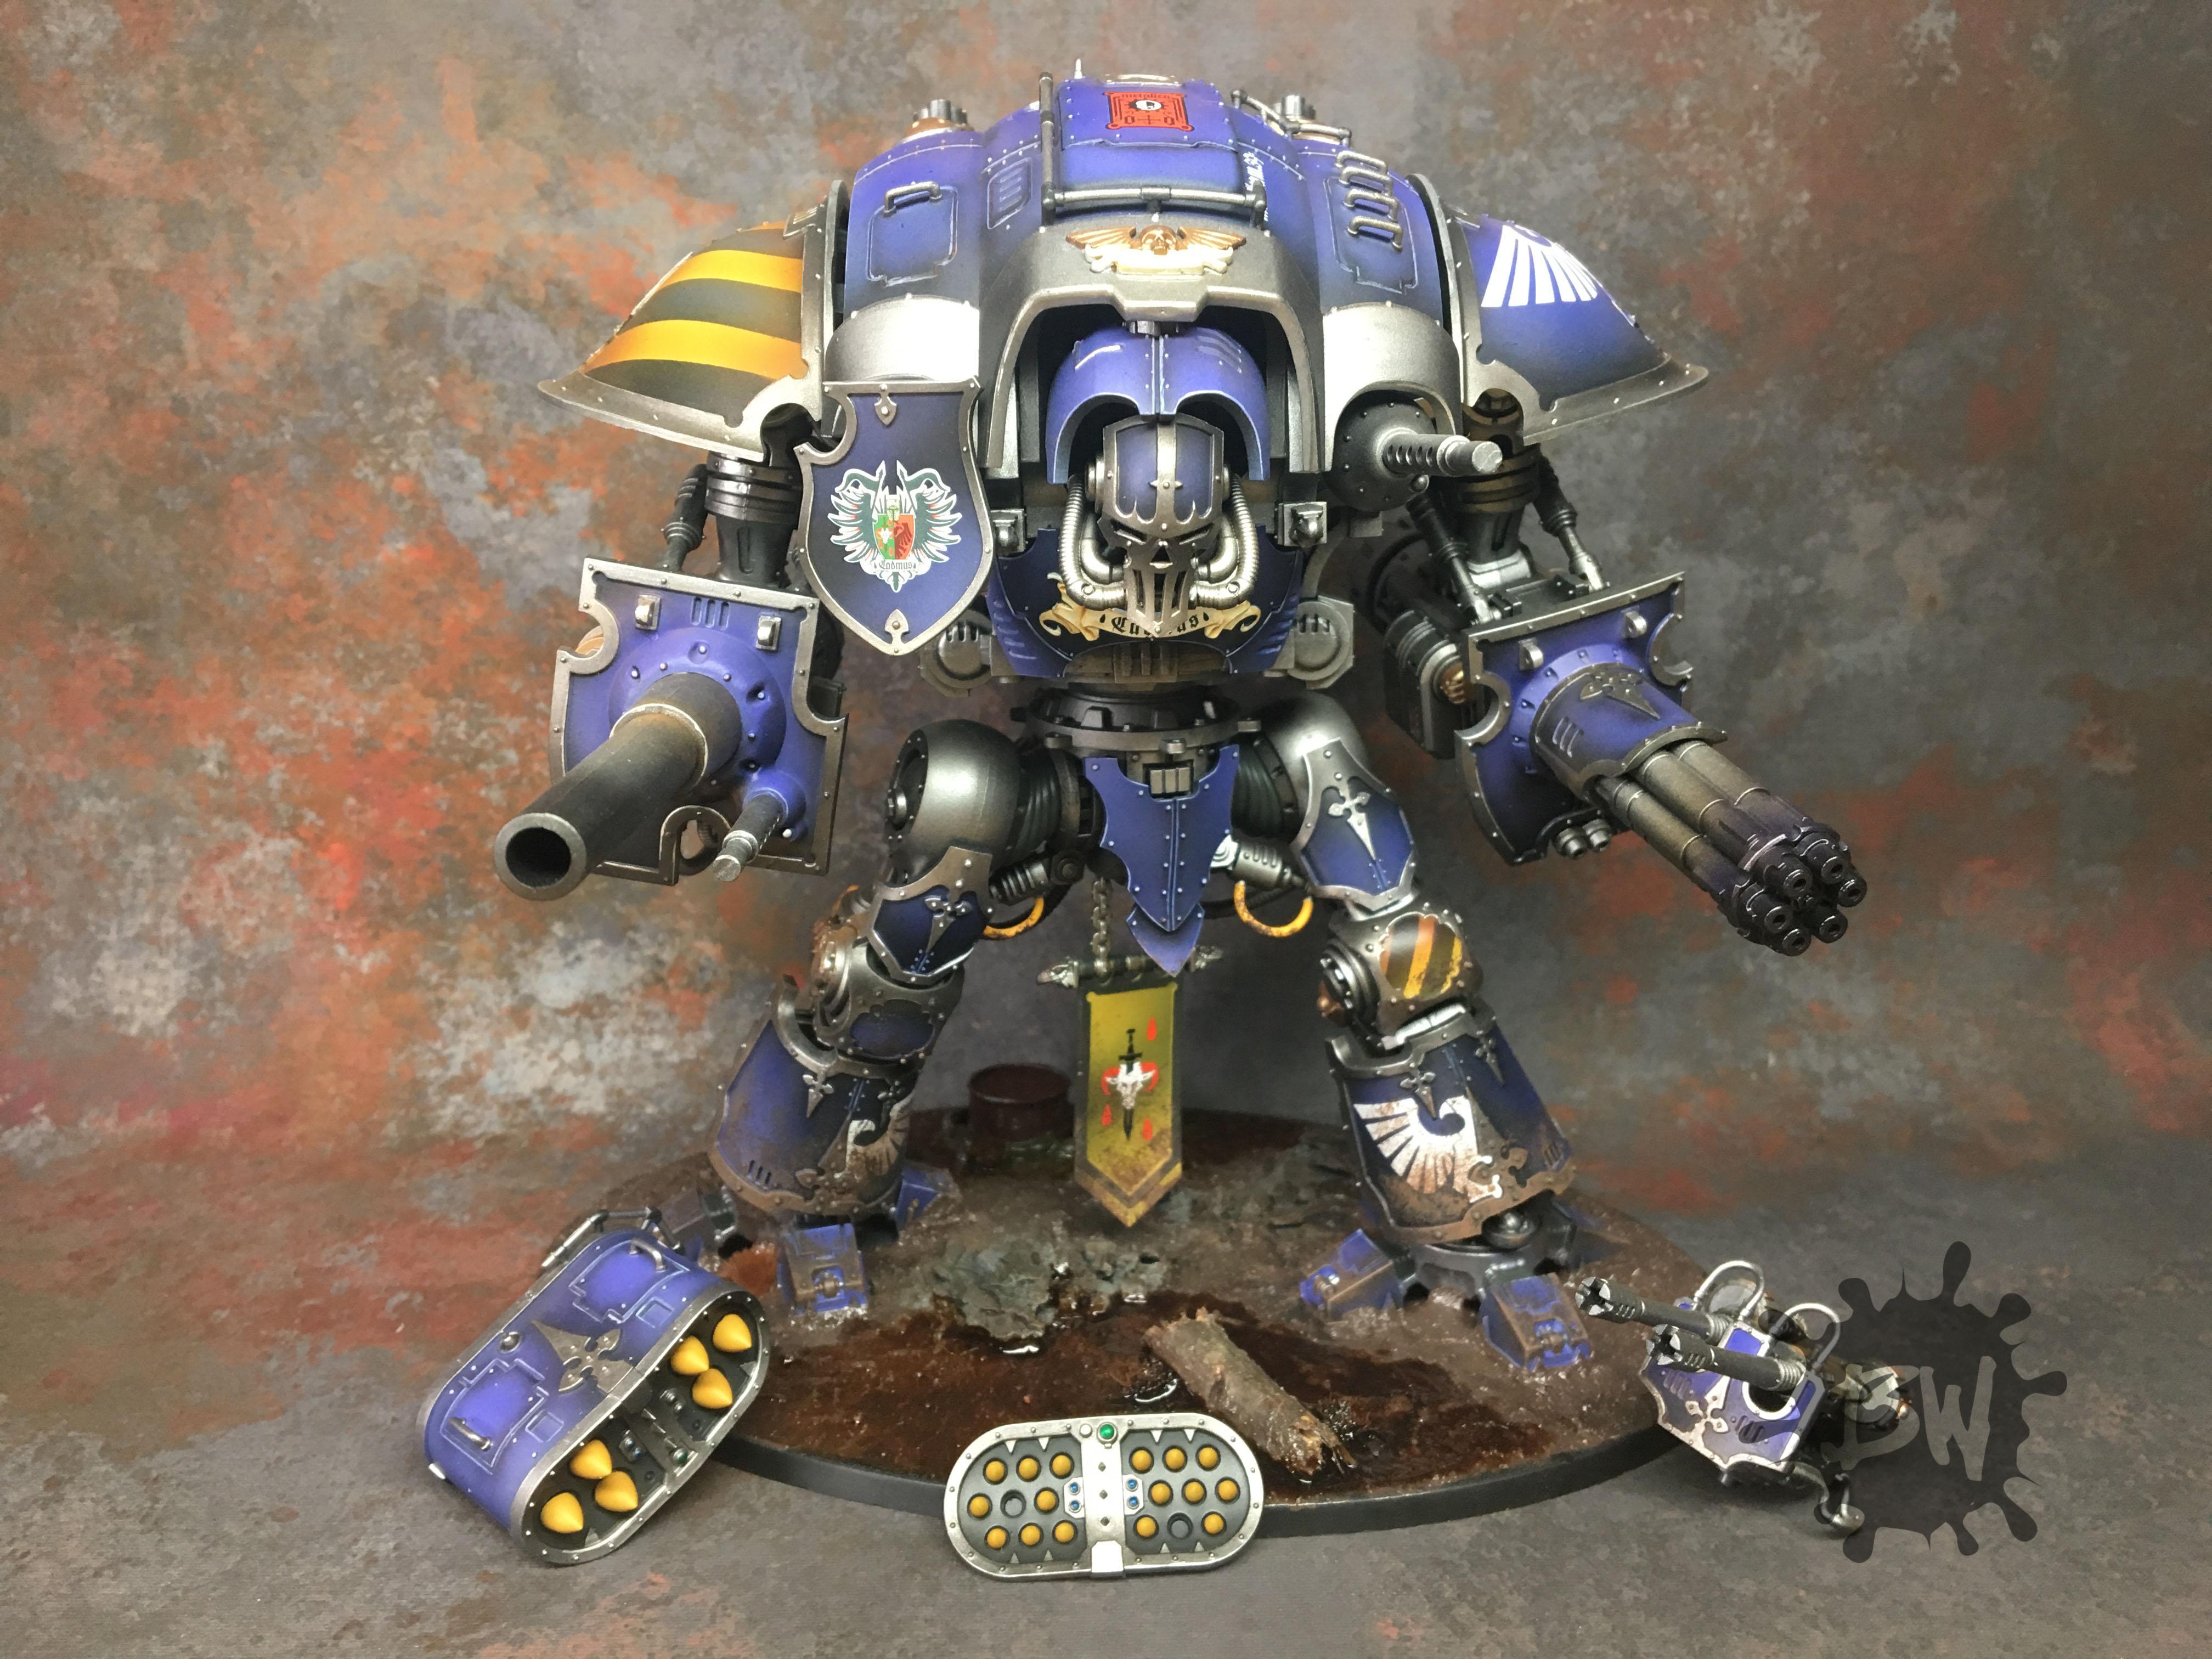 Bw, Commission, Imperial Knight Crusader, Imperium, Painting, Warhammer 40,000, Warhammer Fantasy